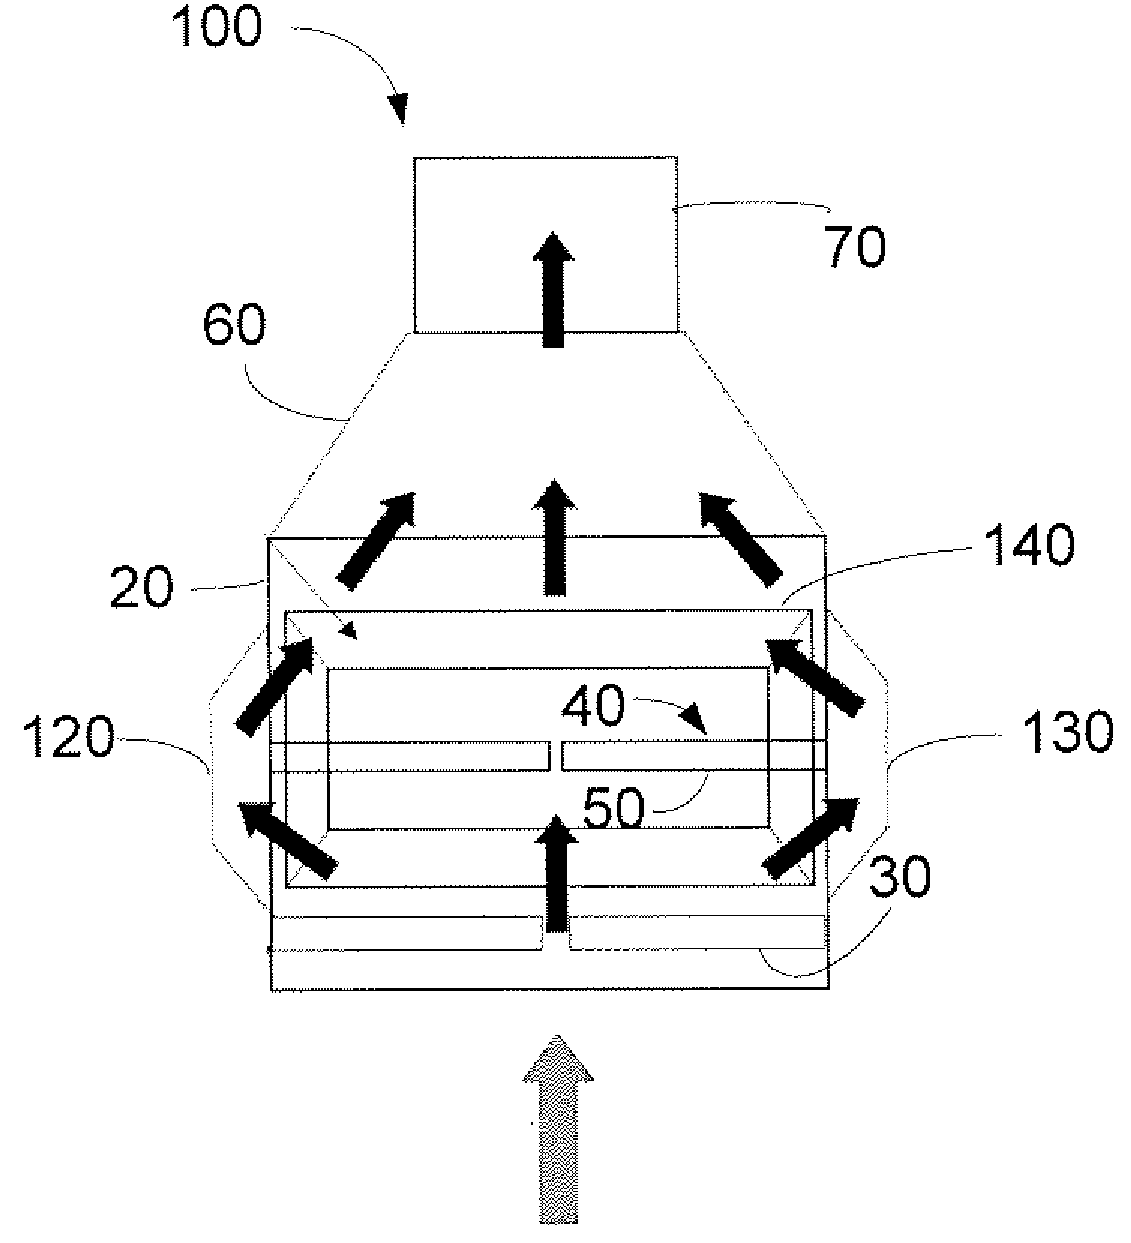 Air Bypass System for Gas turbine Inlet